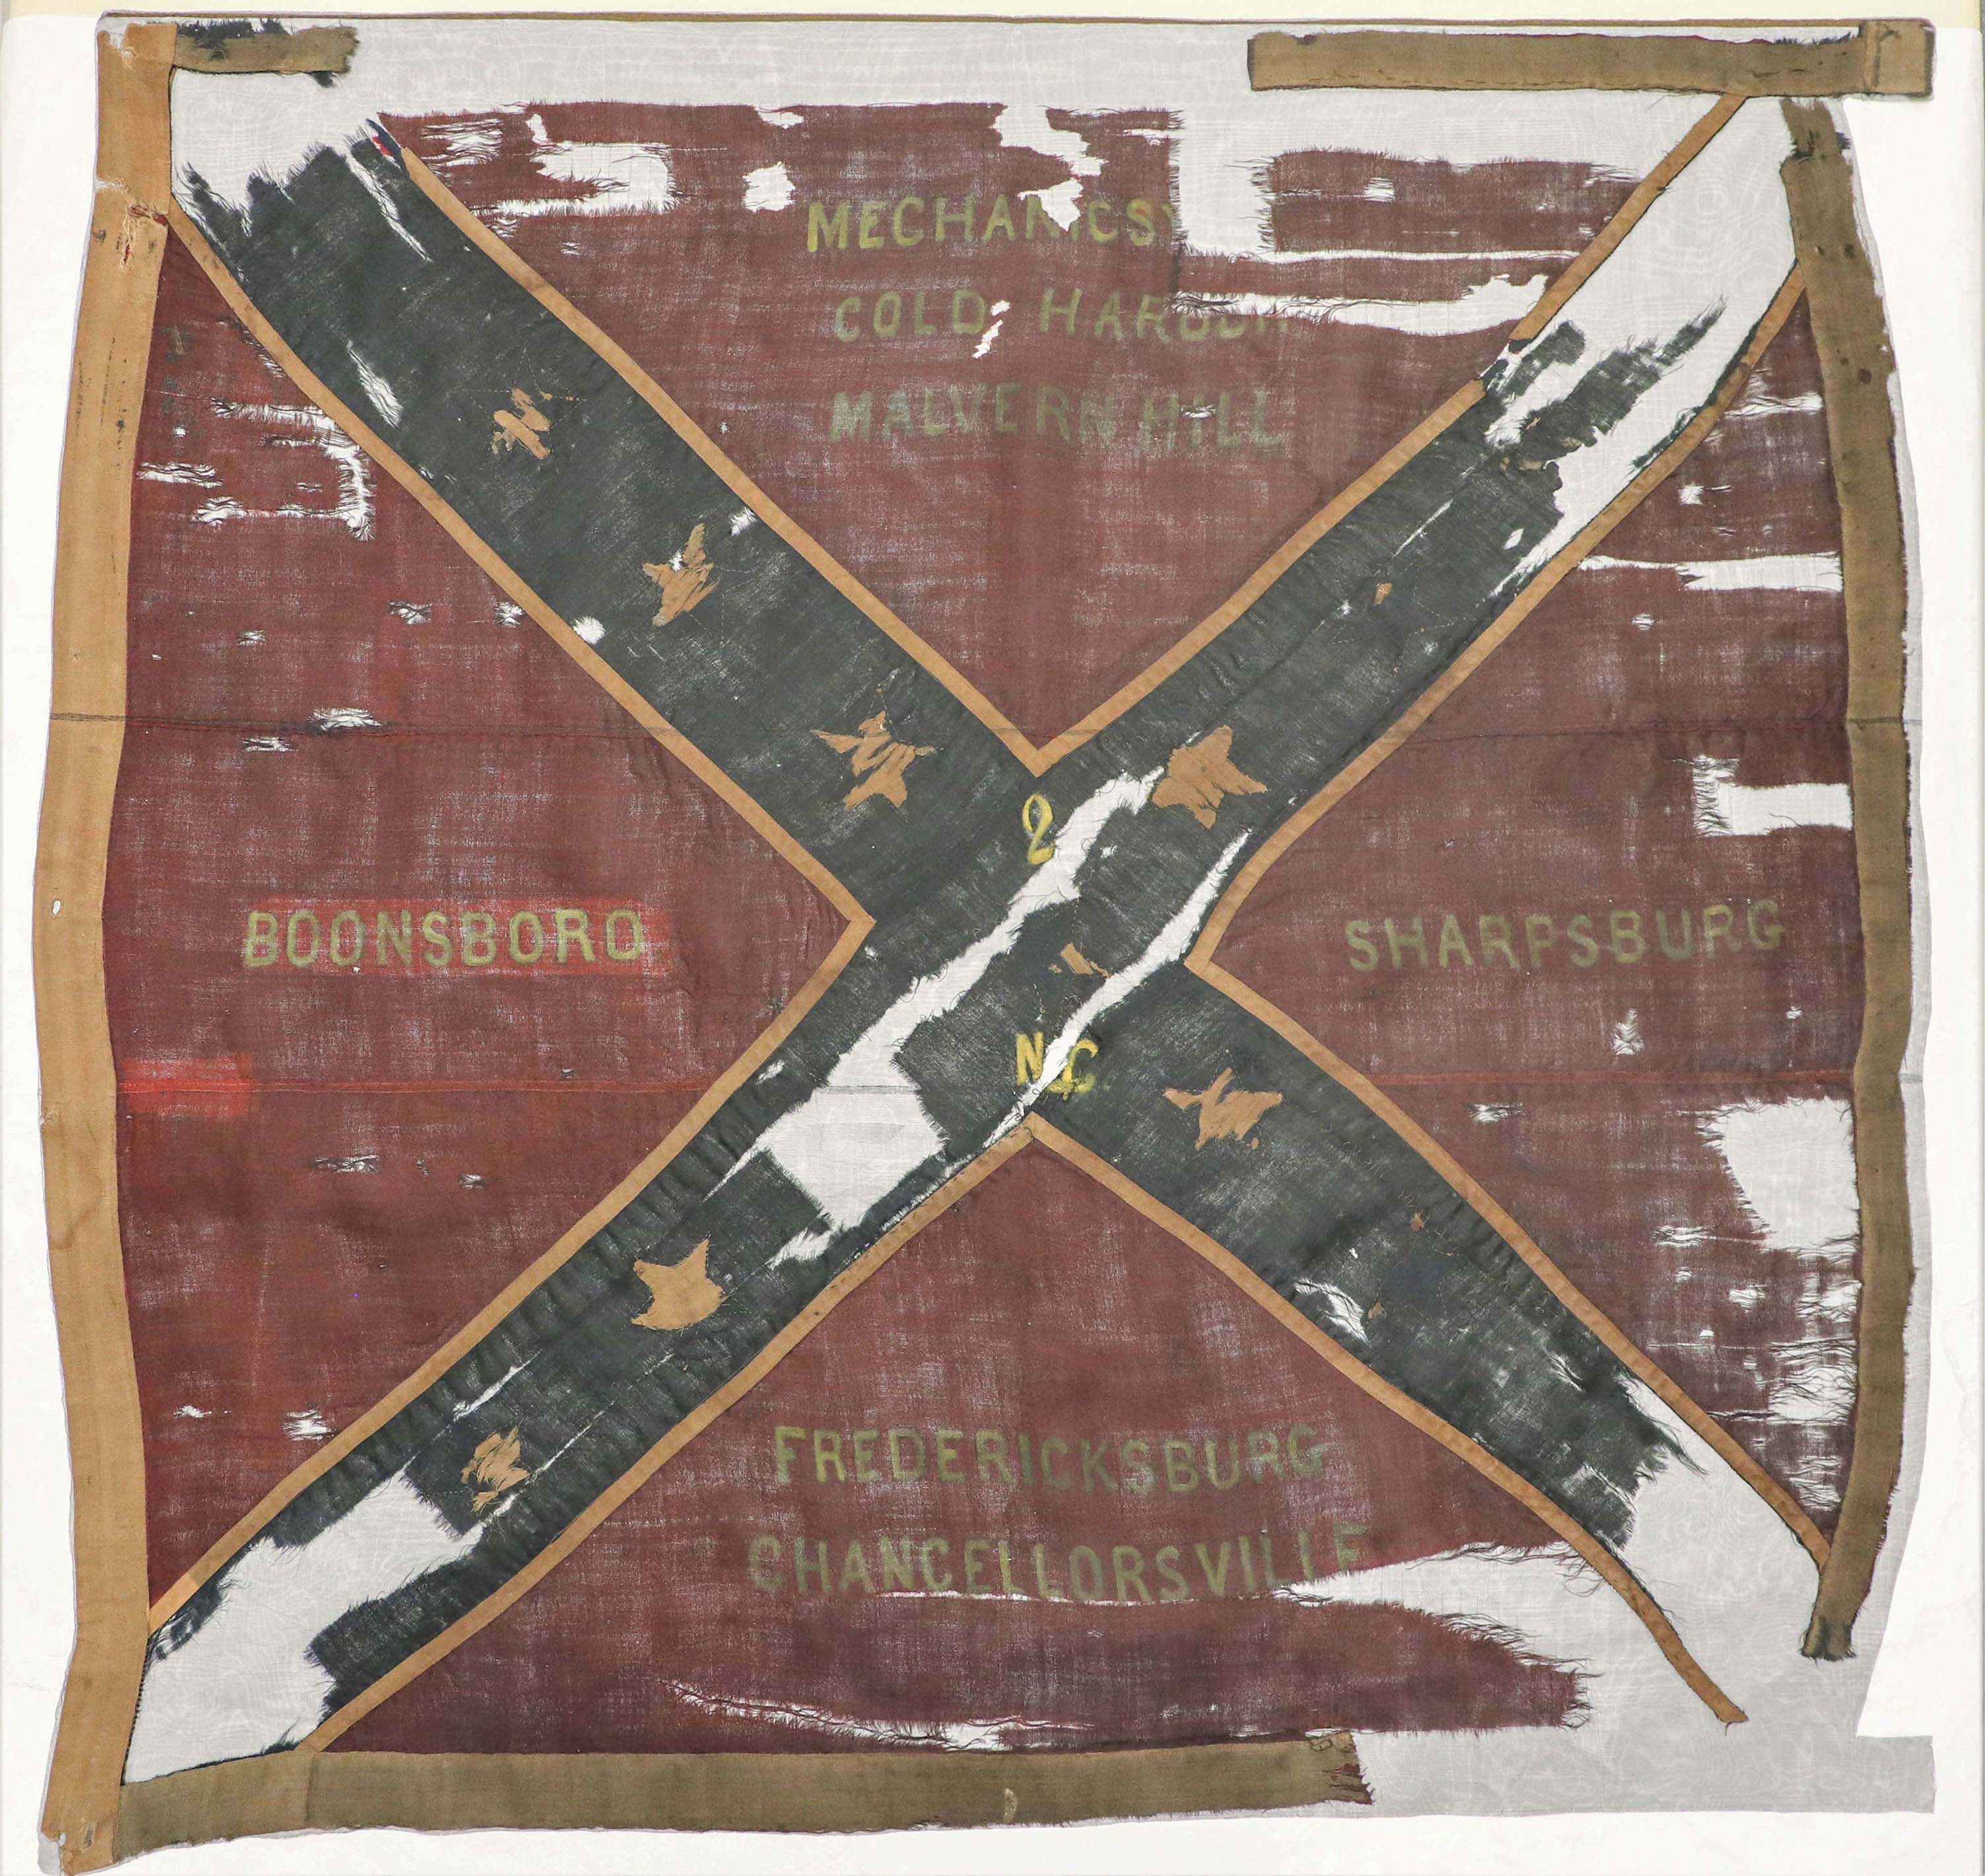 A tattered and worn red flag, with a blue X and small white stars inside the X. There are seven town names sewn into the red the red quadrants.